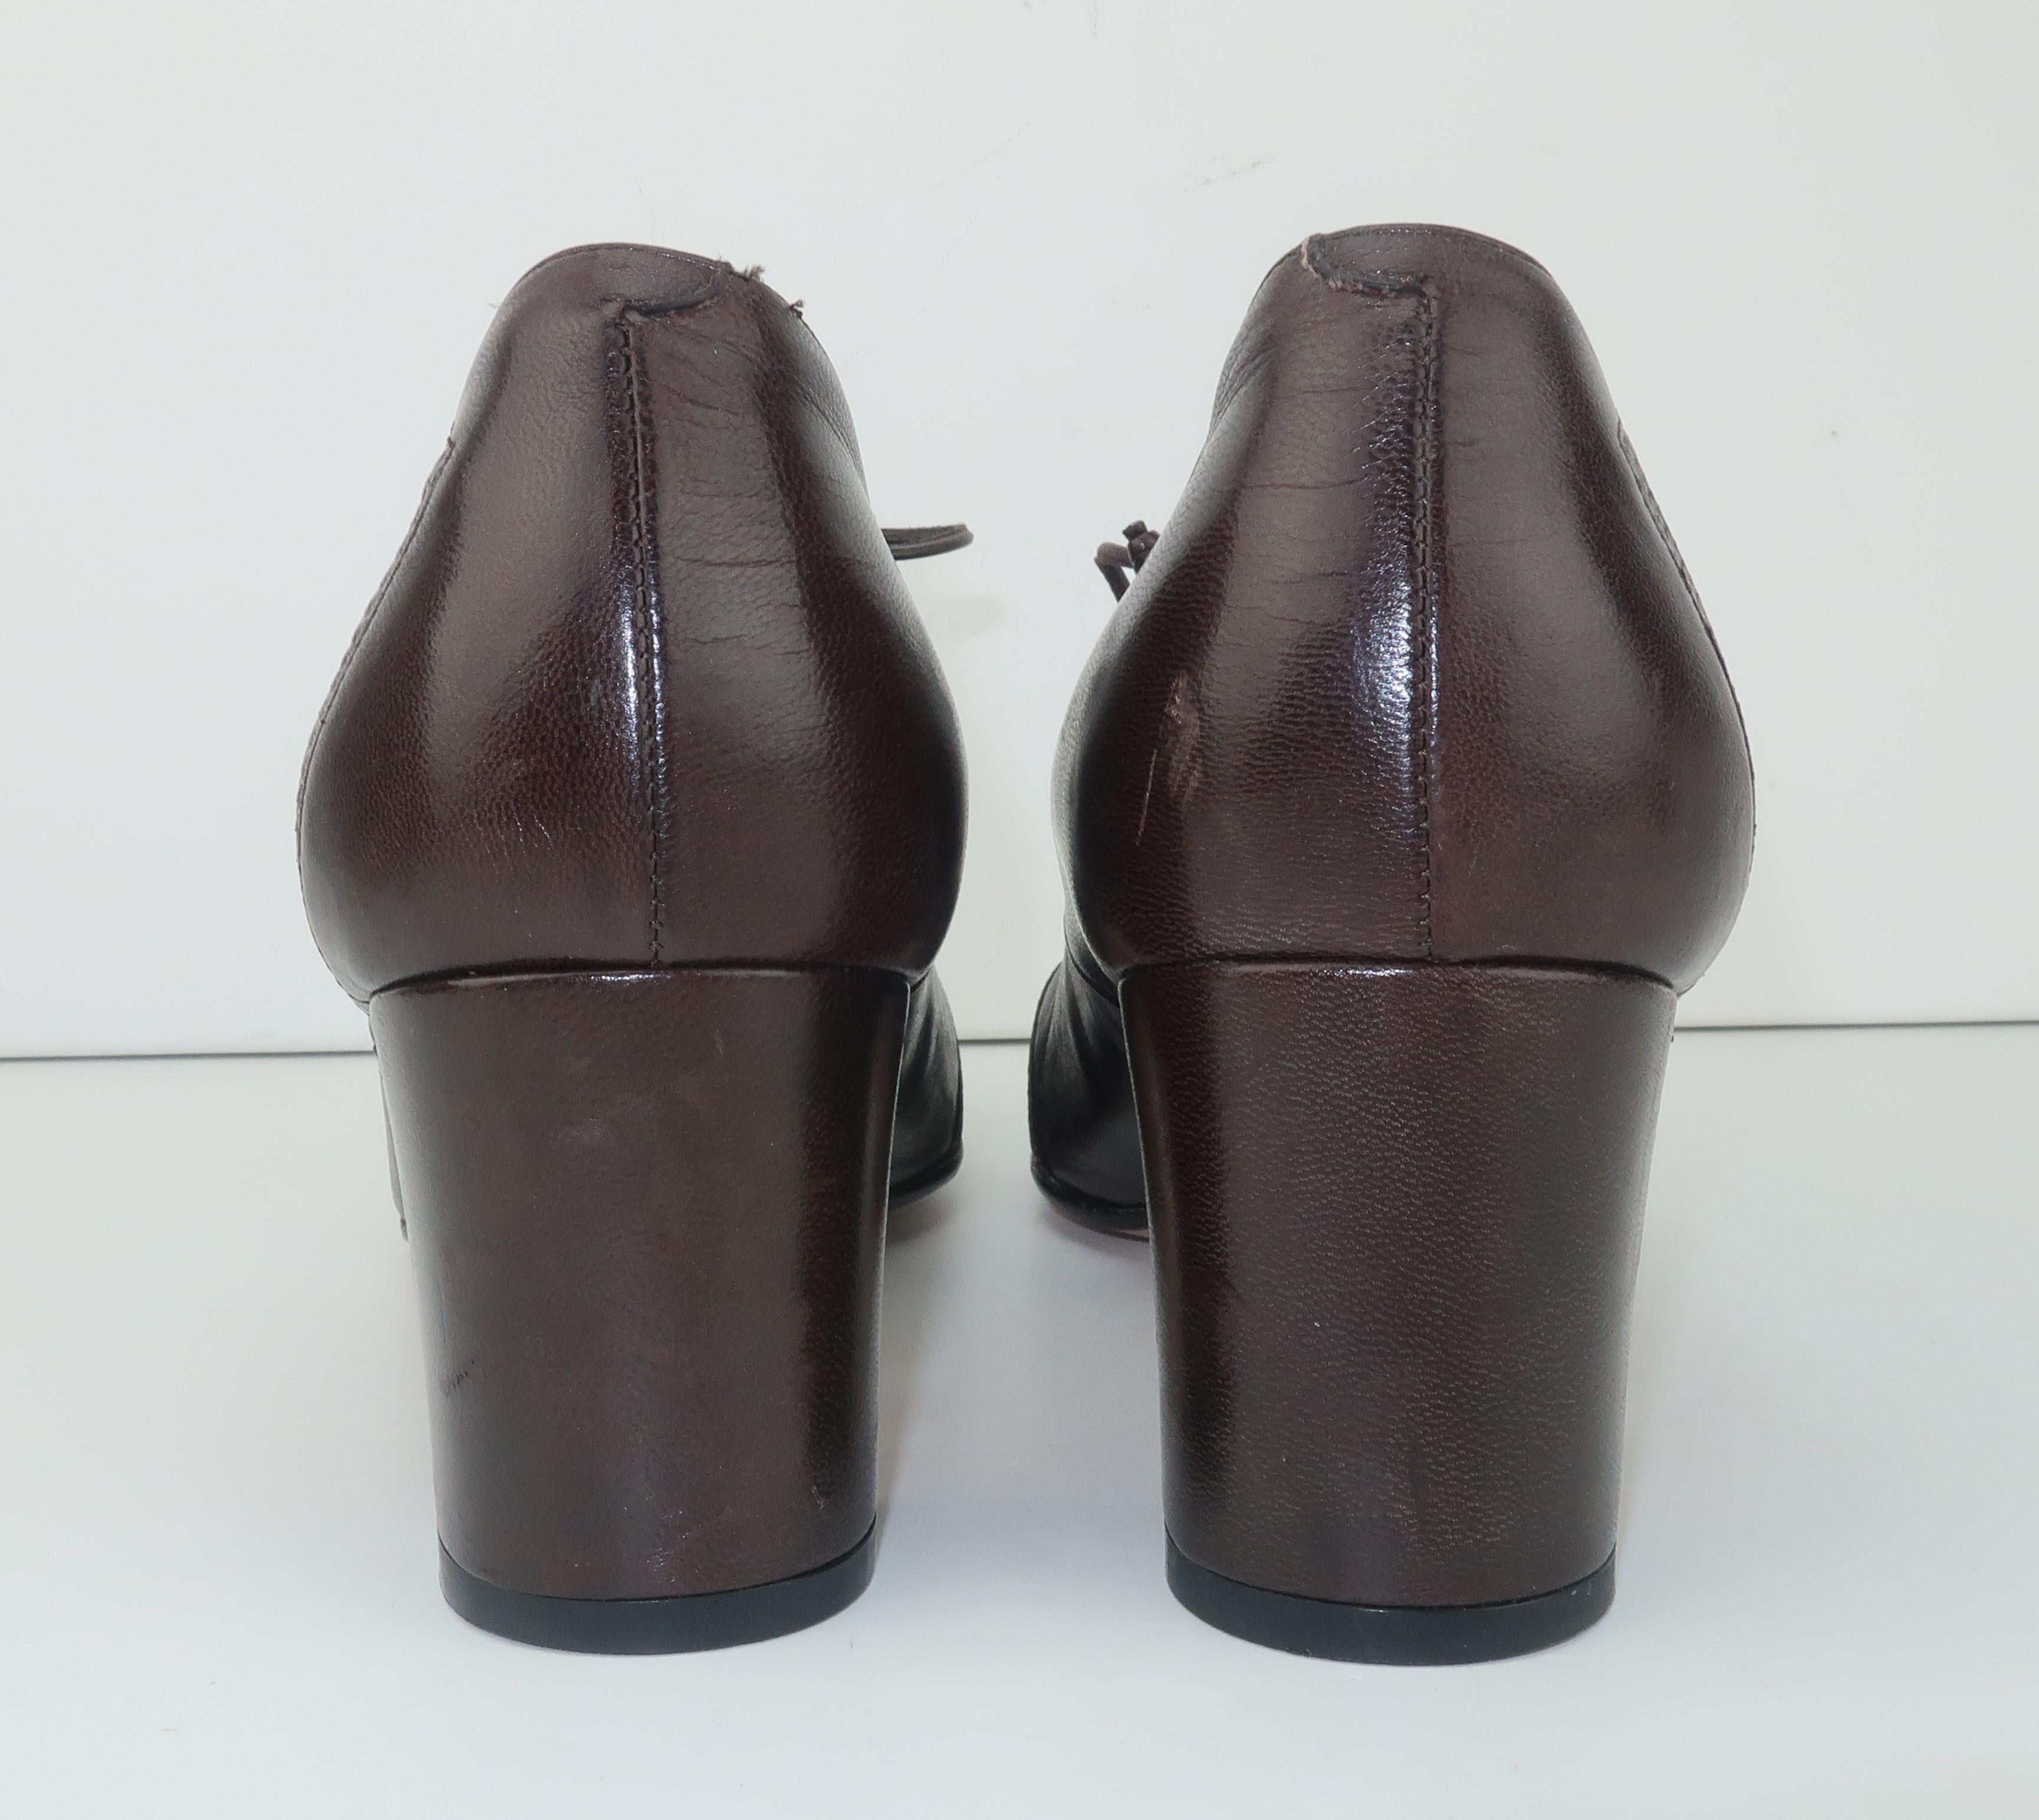 Women's Bally Brown Leather Heeled Oxford Shoes Sz 8 M, 1990's